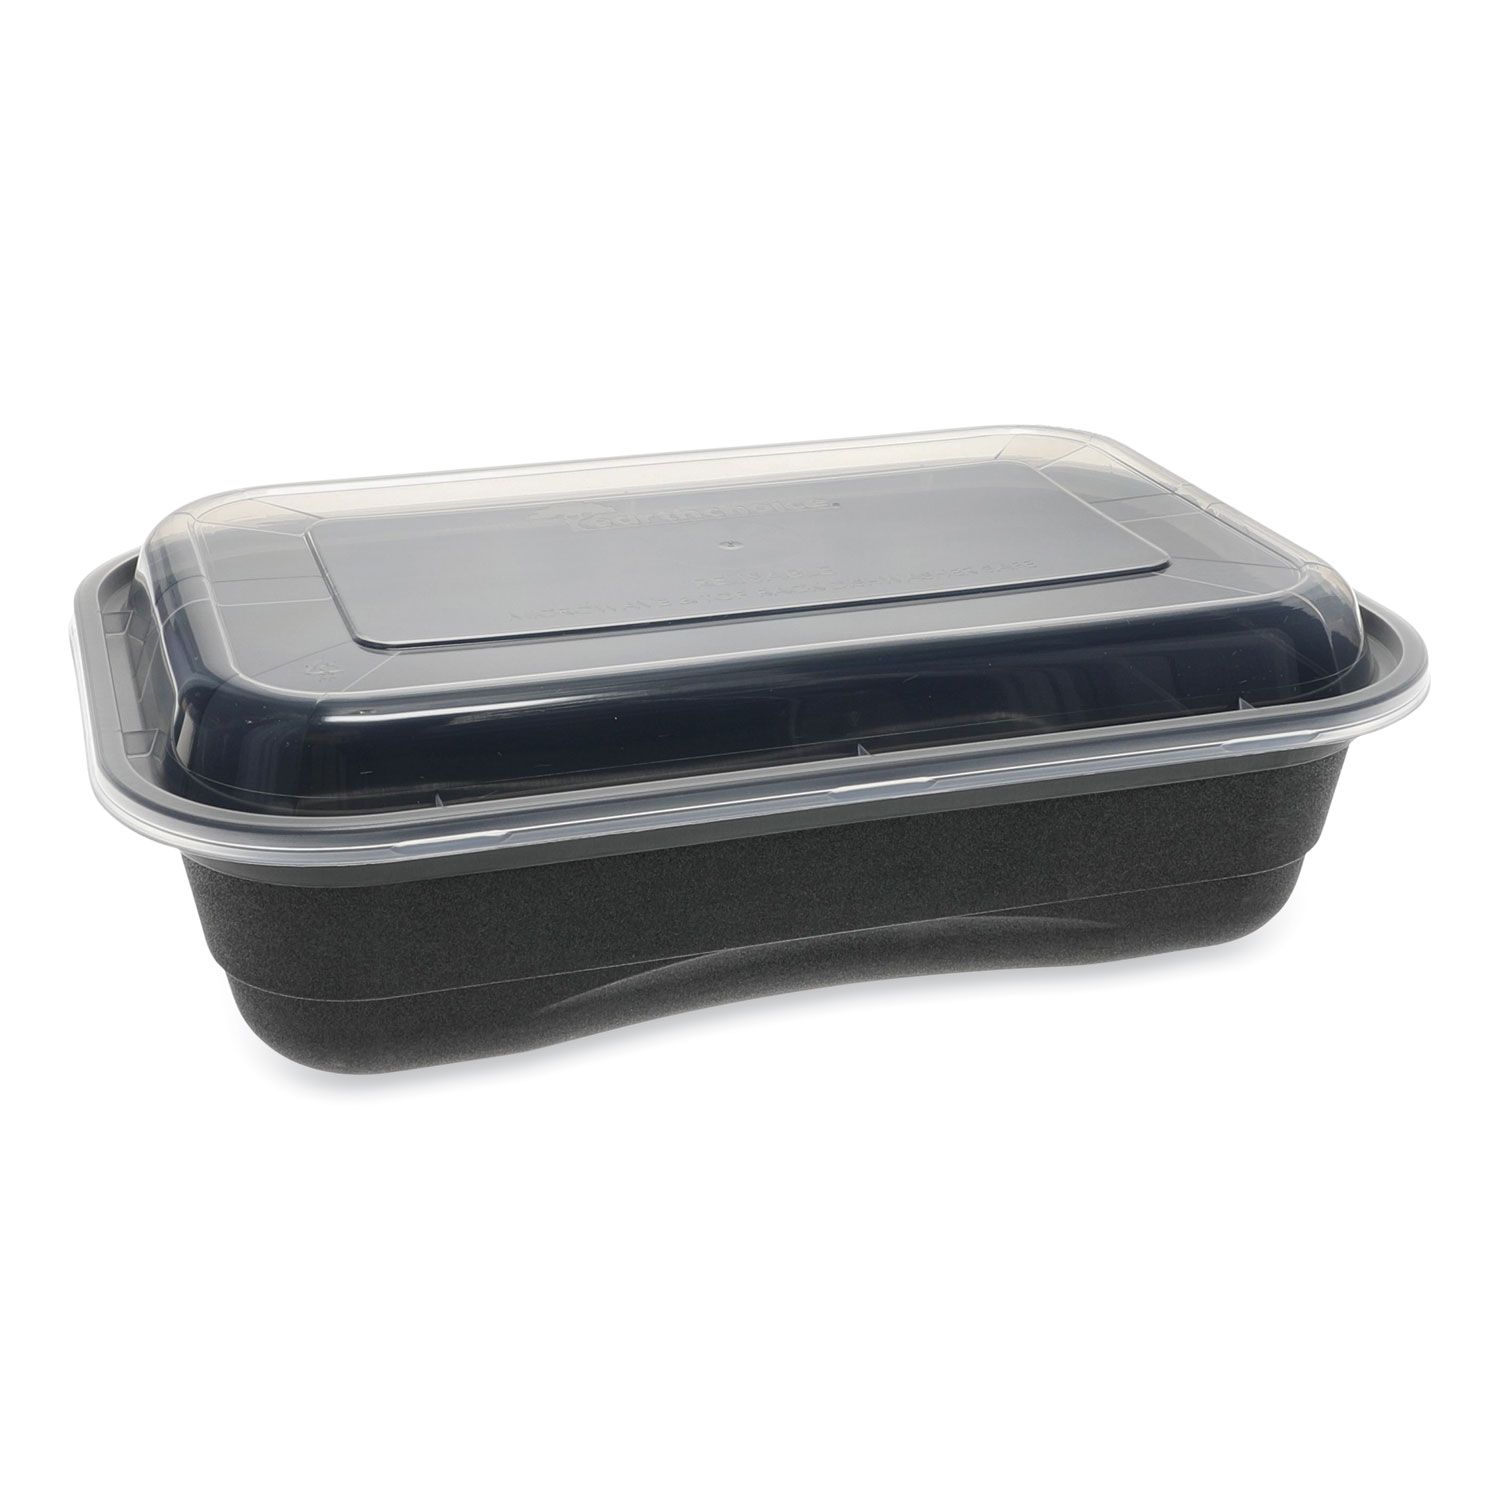 Plastic To-Go Containers And Lids - Rectangle - White With Clear